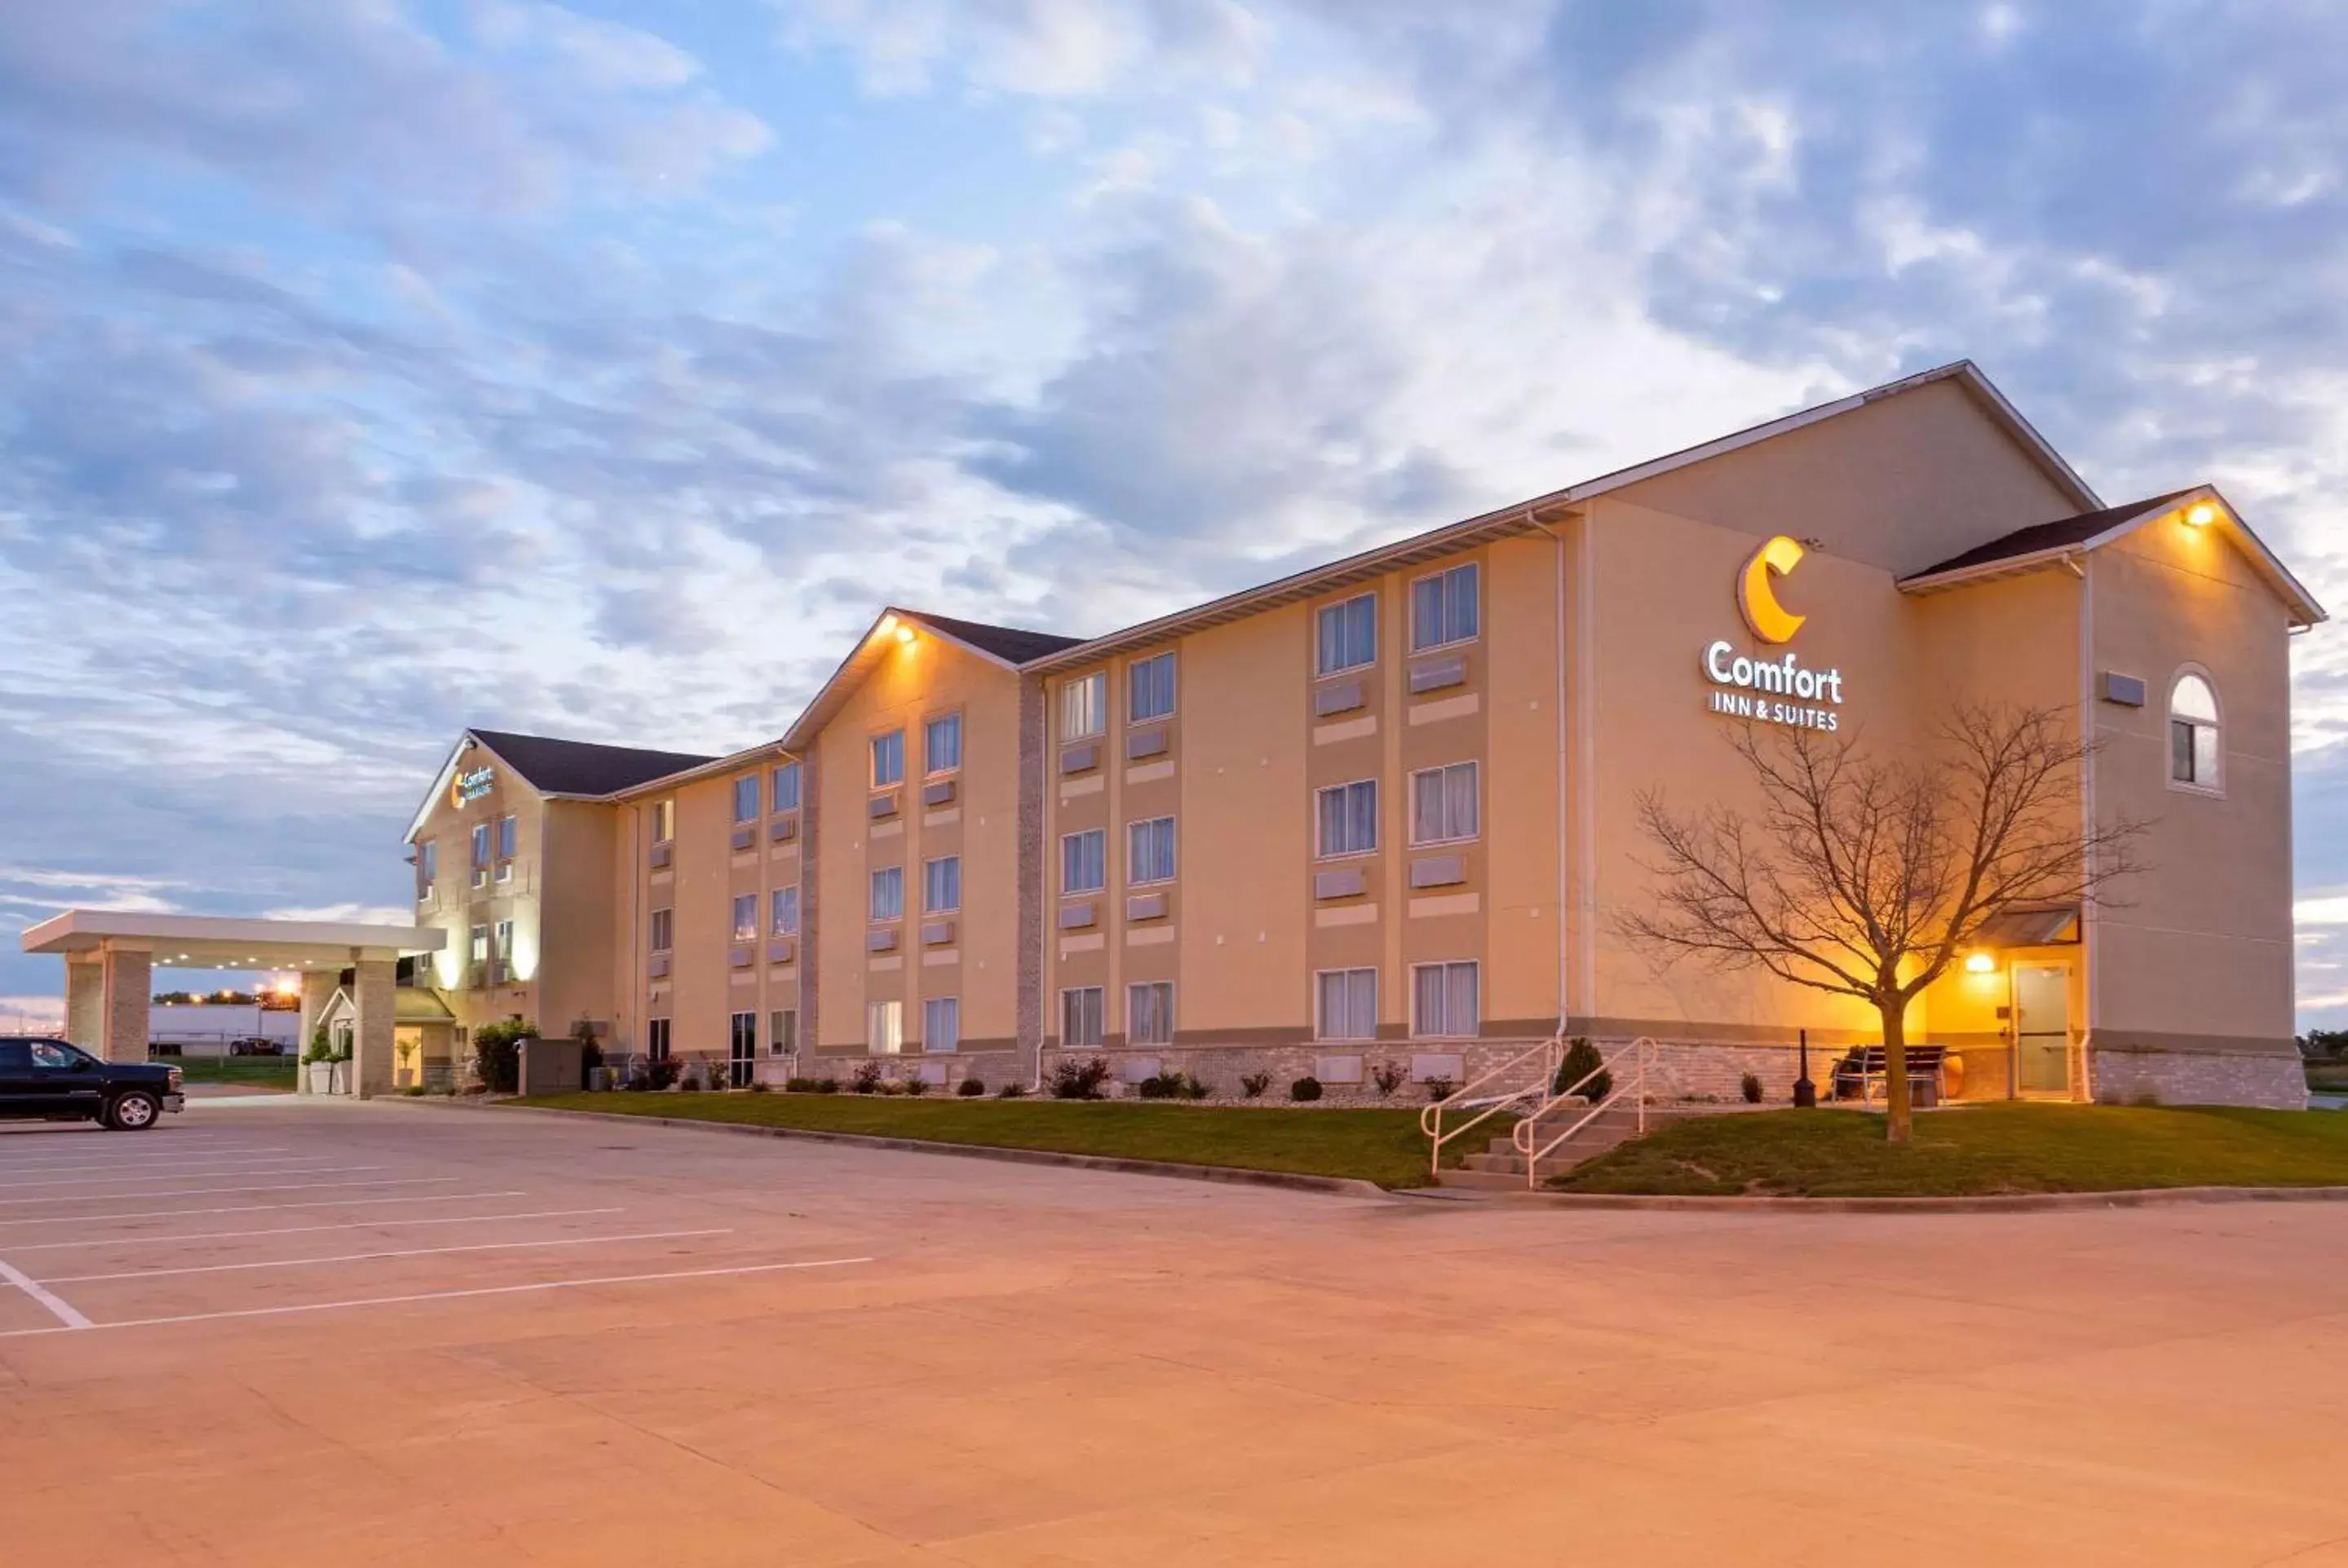 Other, Property Building in Comfort Inn & Suites near Route 66 Award Winning Gold Hotel 2021